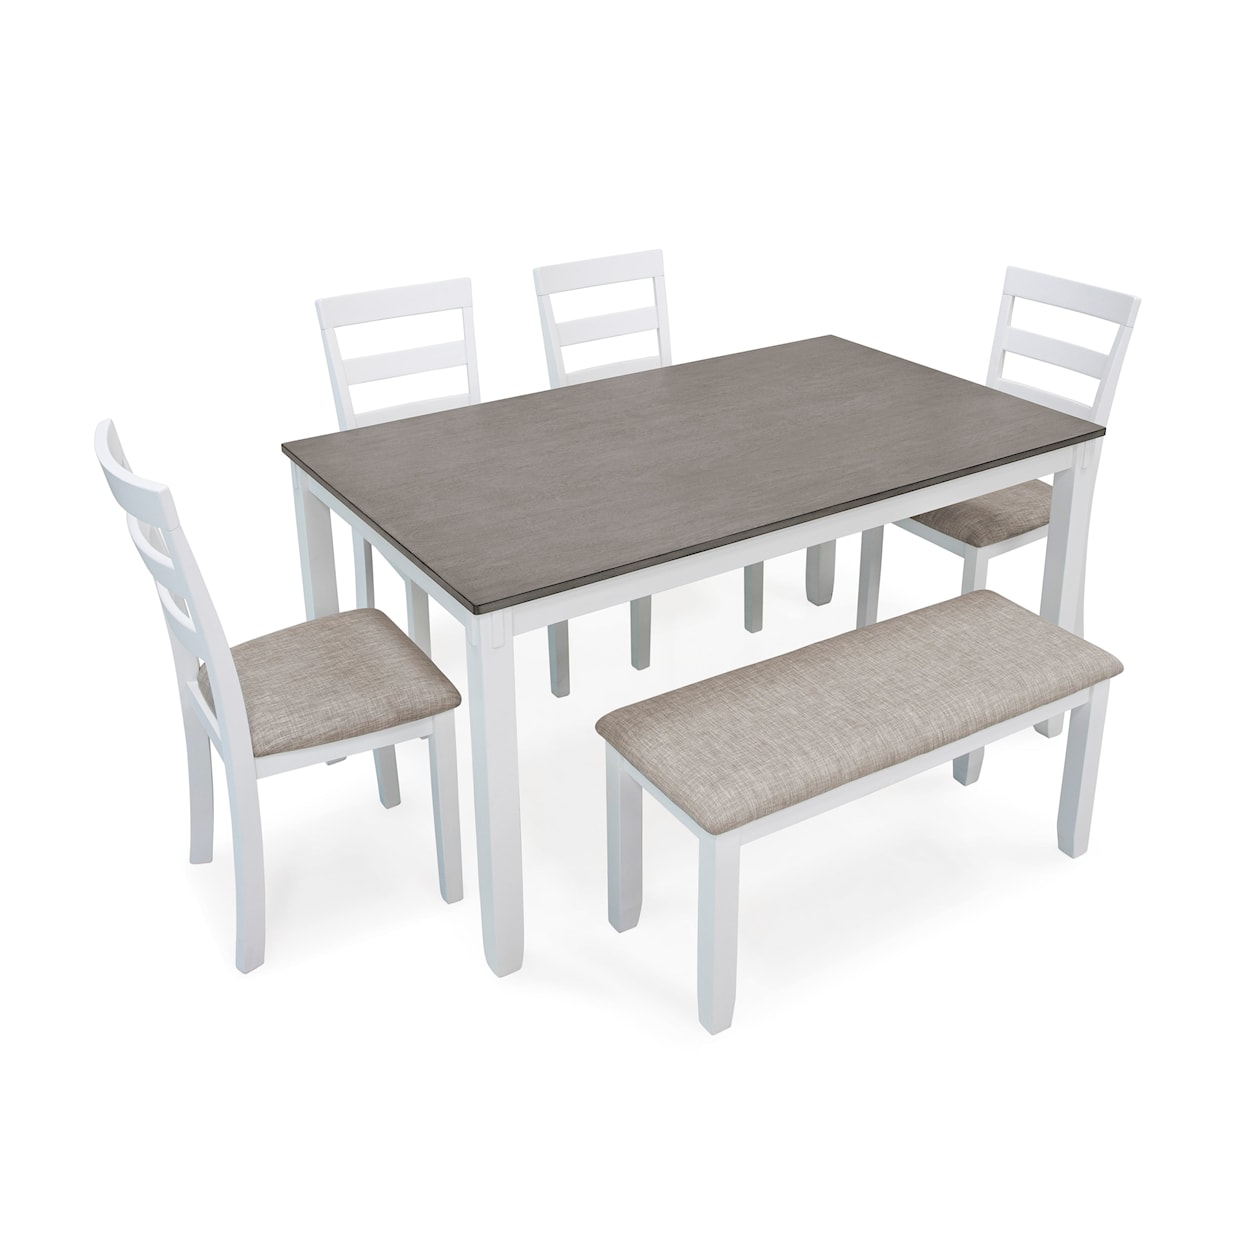 Signature Design Stonehollow Dining Table and Chairs with Bench Set